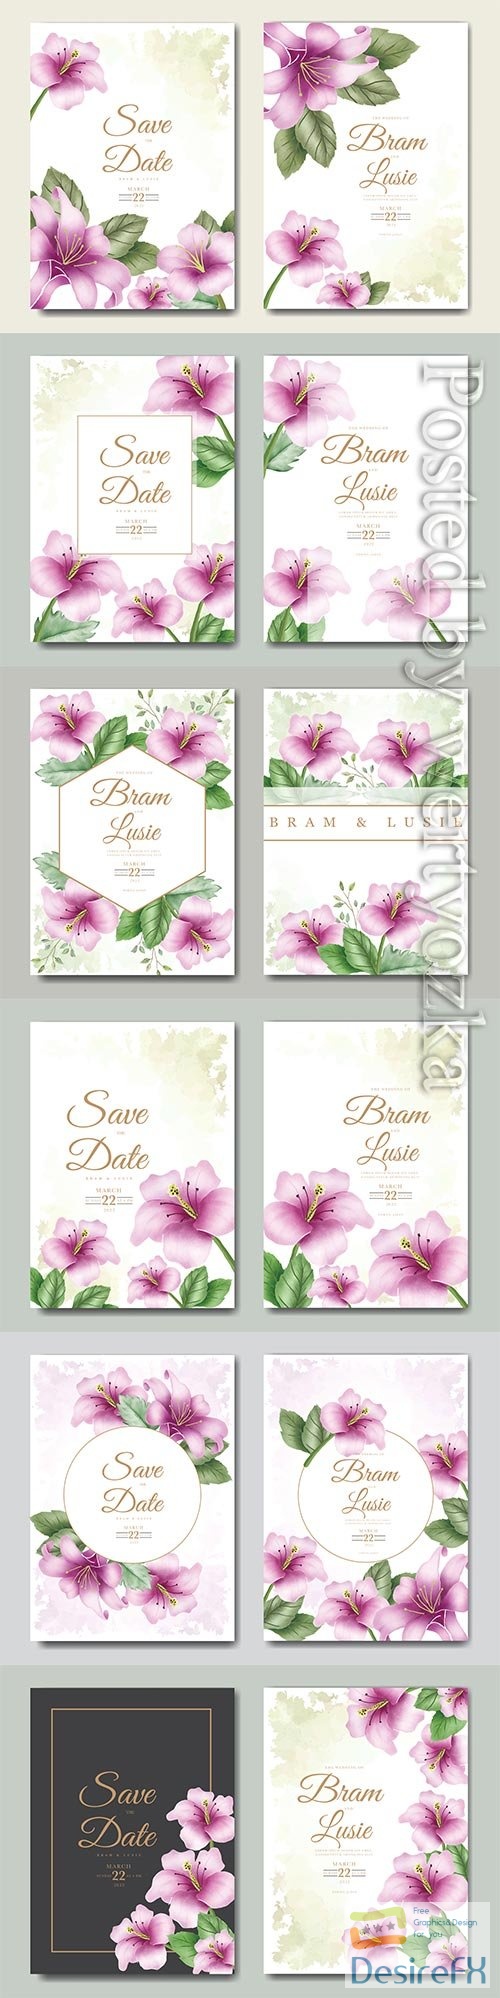 Wedding invitation card with with beautiful flowers watercolor